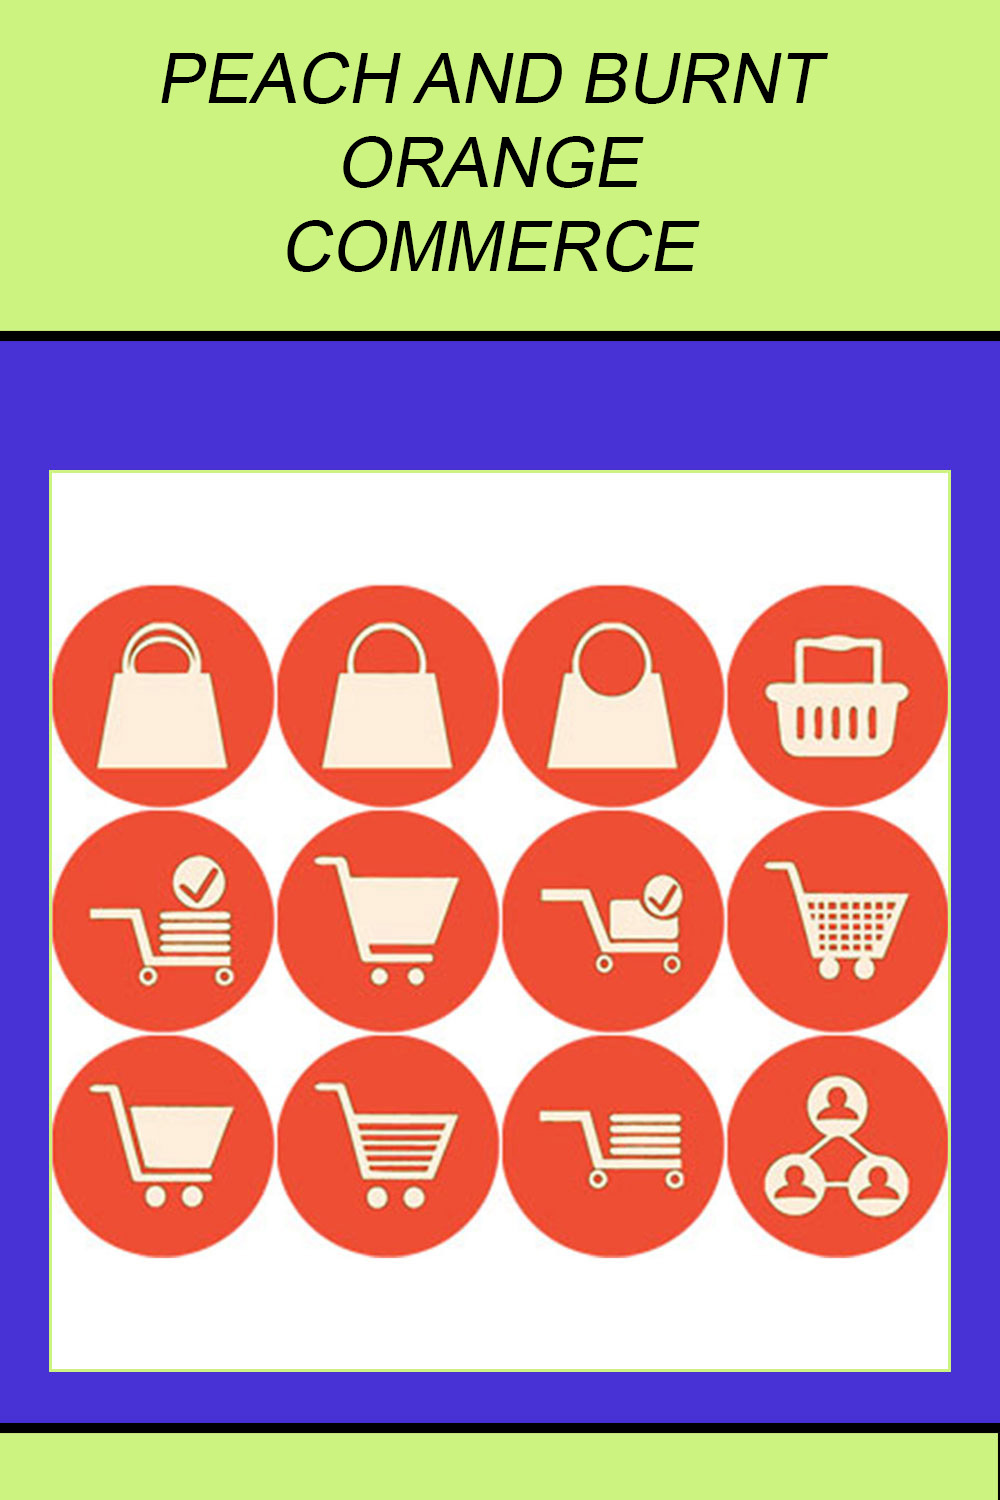 PEACH AND BURNT ORANGE COMMERCE ROUND ICONS pinterest preview image.